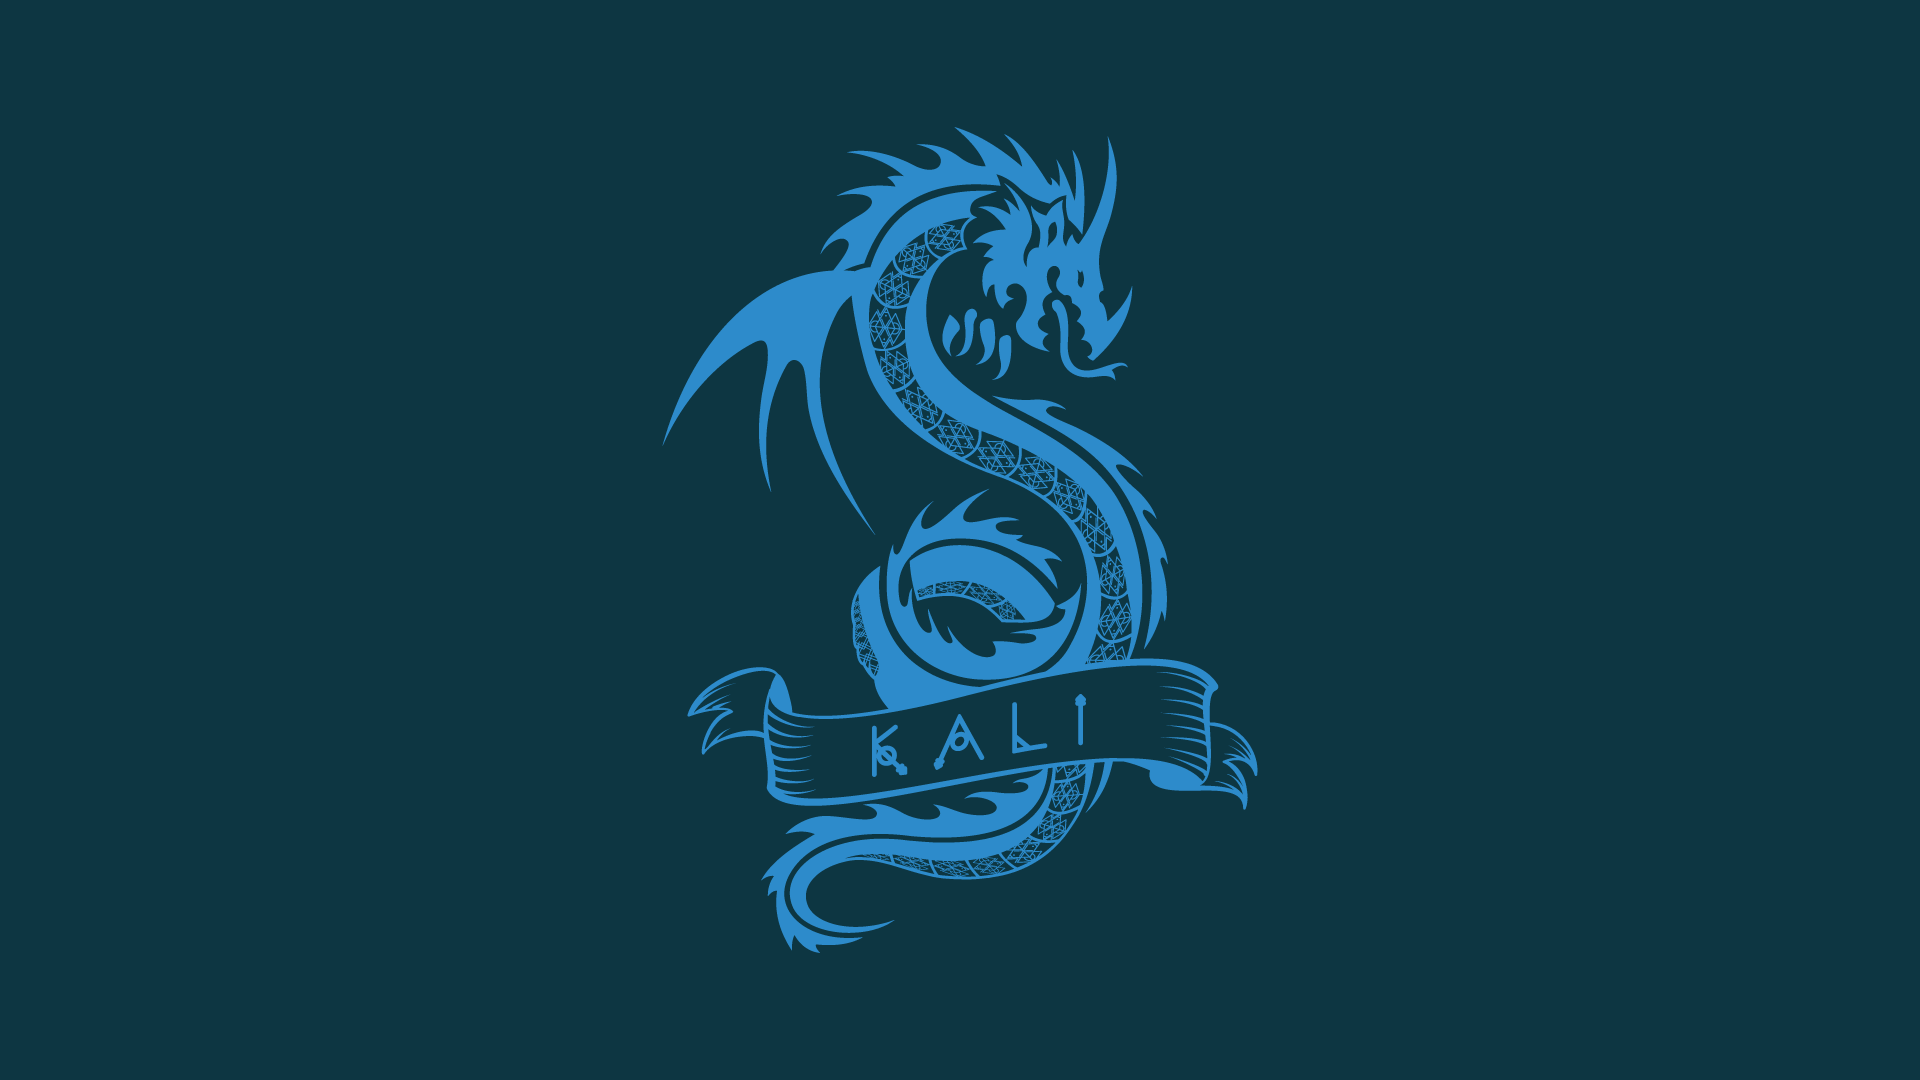 General 1920x1080 GNU minimalism blue background Kali Linux Linux simple background dragon creature solarized colorscheme tail wings Chinese dragon operating system